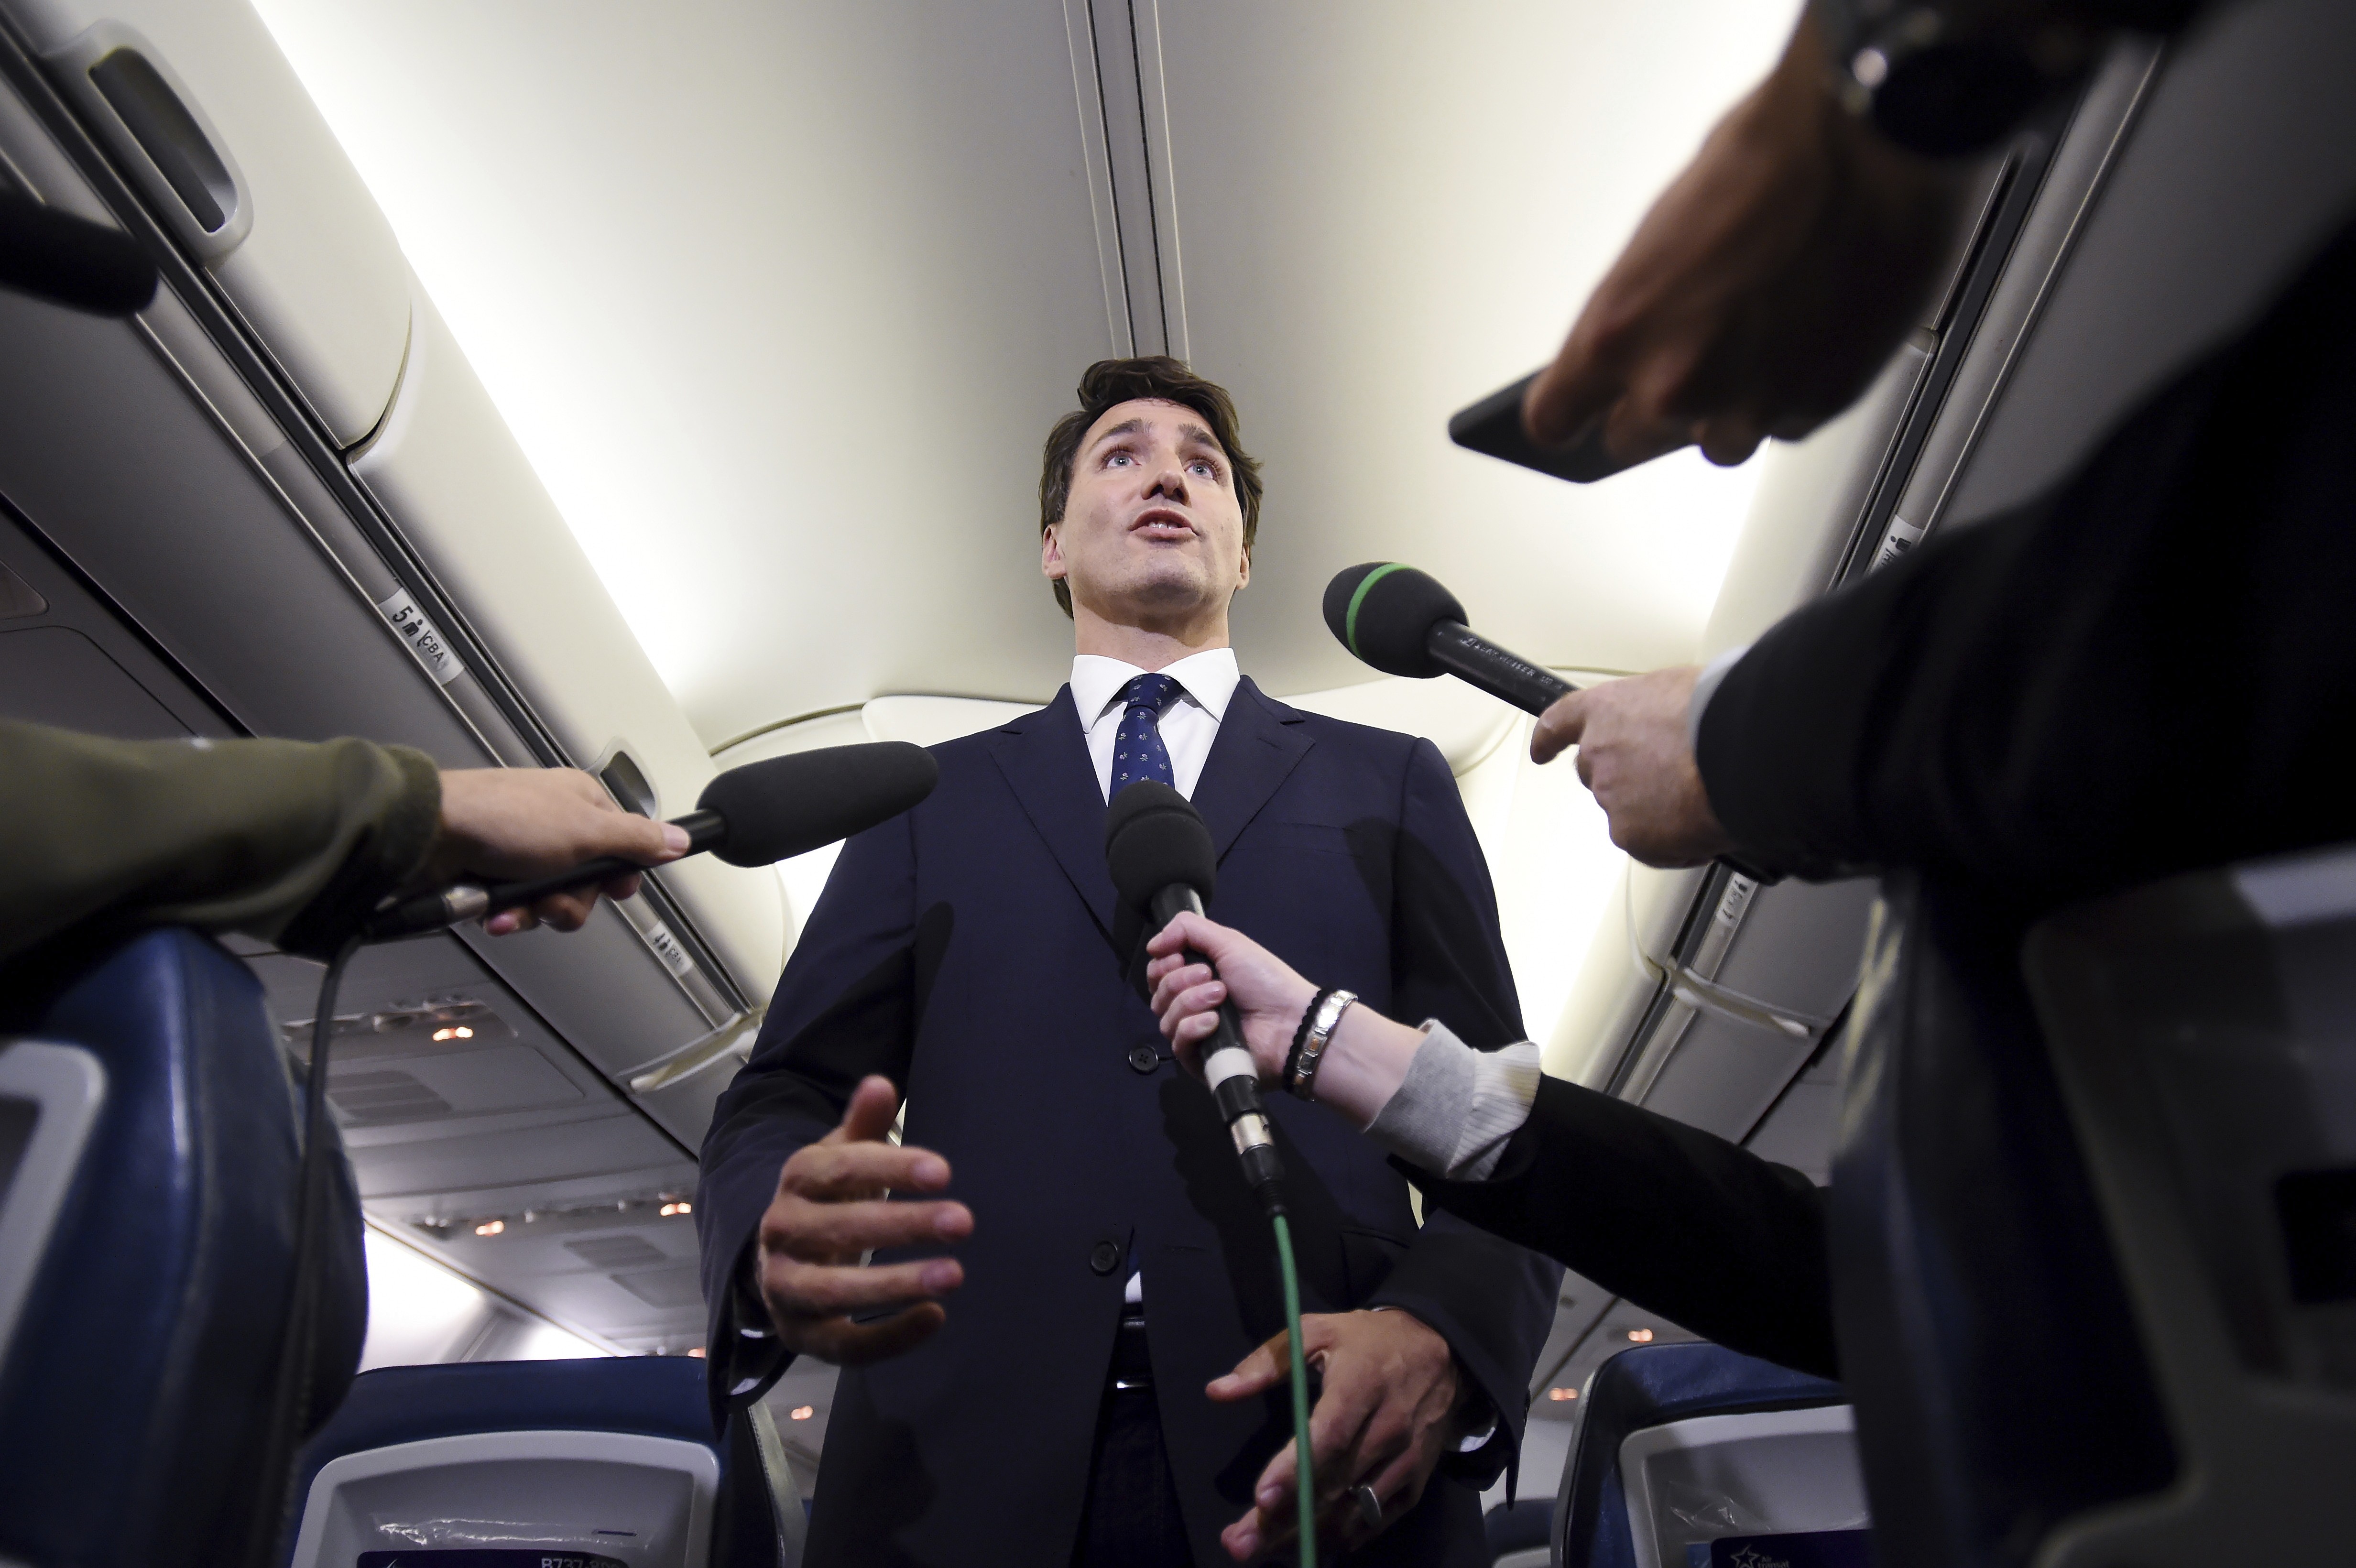 Canadian leader Justin Trudeau is under fire over photos and videos of an act he put on years ago. Photo: The Canadian Press via AP